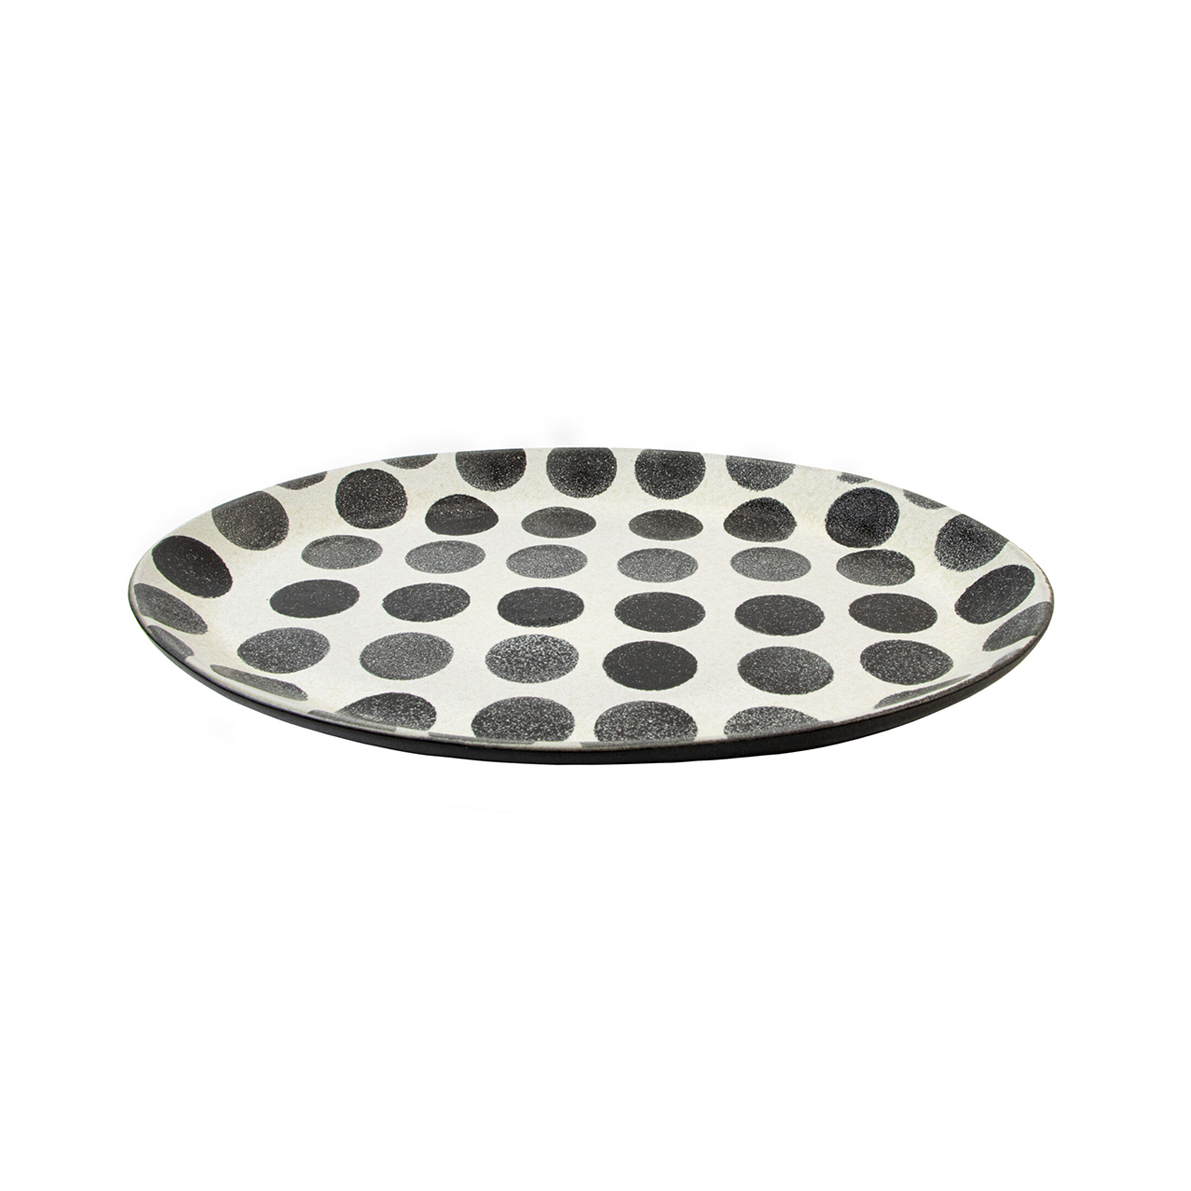 DARQUE SMALL SPOTTED PLATTER 